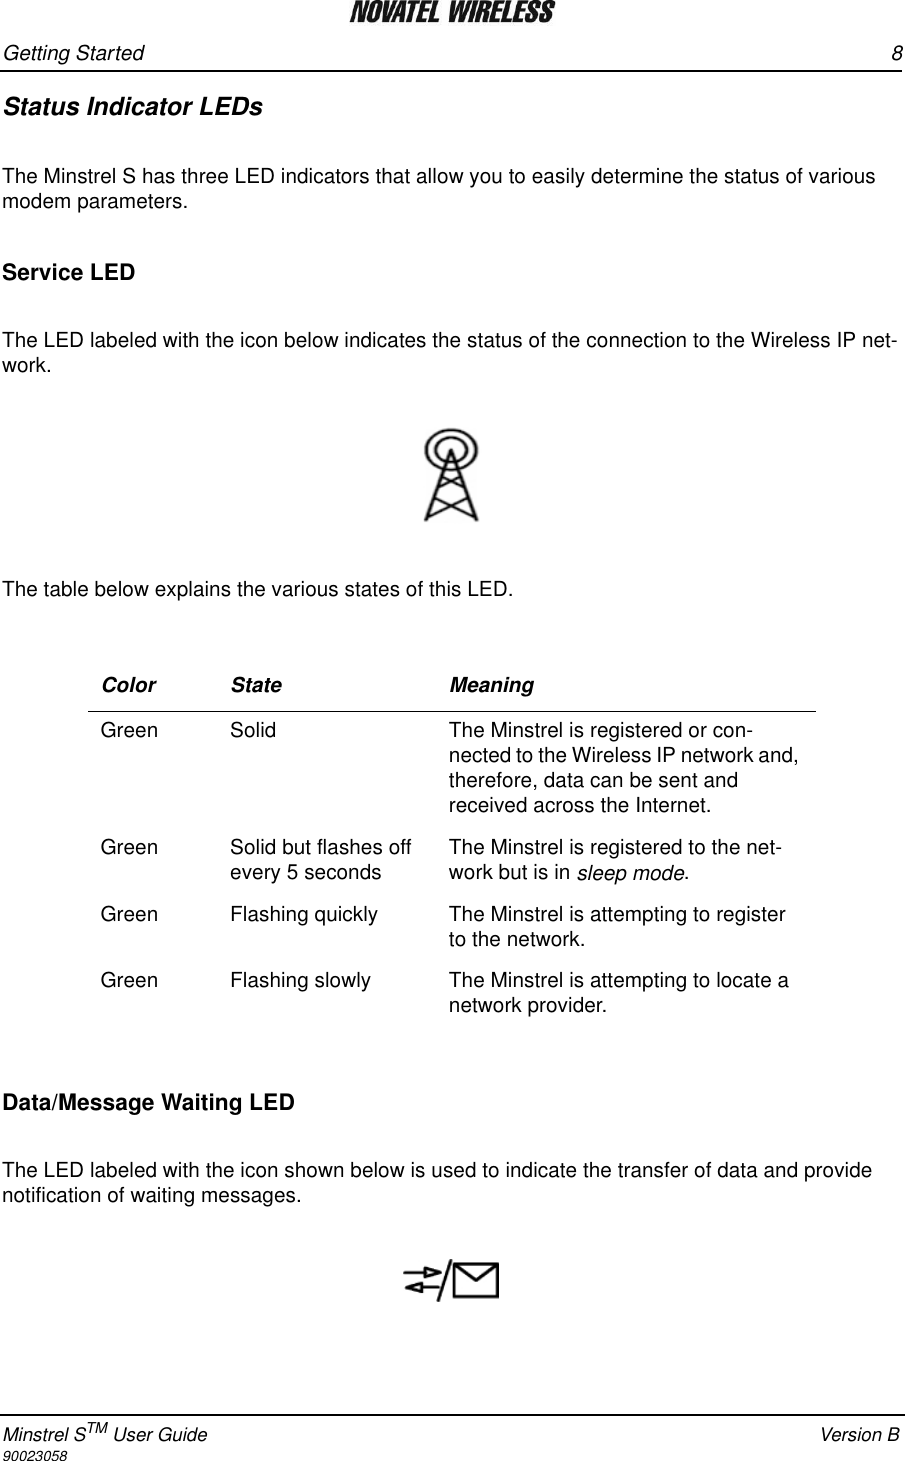 Getting Started 8Minstrel STM User Guide Version B90023058Status Indicator LEDsThe Minstrel S has three LED indicators that allow you to easily determine the status of various modem parameters.  Service LEDThe LED labeled with the icon below indicates the status of the connection to the Wireless IP net-work. The table below explains the various states of this LED.  Data/Message Waiting LEDThe LED labeled with the icon shown below is used to indicate the transfer of data and provide notification of waiting messages.Color State MeaningGreen Solid The Minstrel is registered or con-nected to the Wireless IP network and, therefore, data can be sent and received across the Internet.  Green  Solid but flashes off every 5 seconds The Minstrel is registered to the net-work but is in sleep mode.Green Flashing quickly The Minstrel is attempting to register to the network.Green Flashing slowly The Minstrel is attempting to locate a network provider.